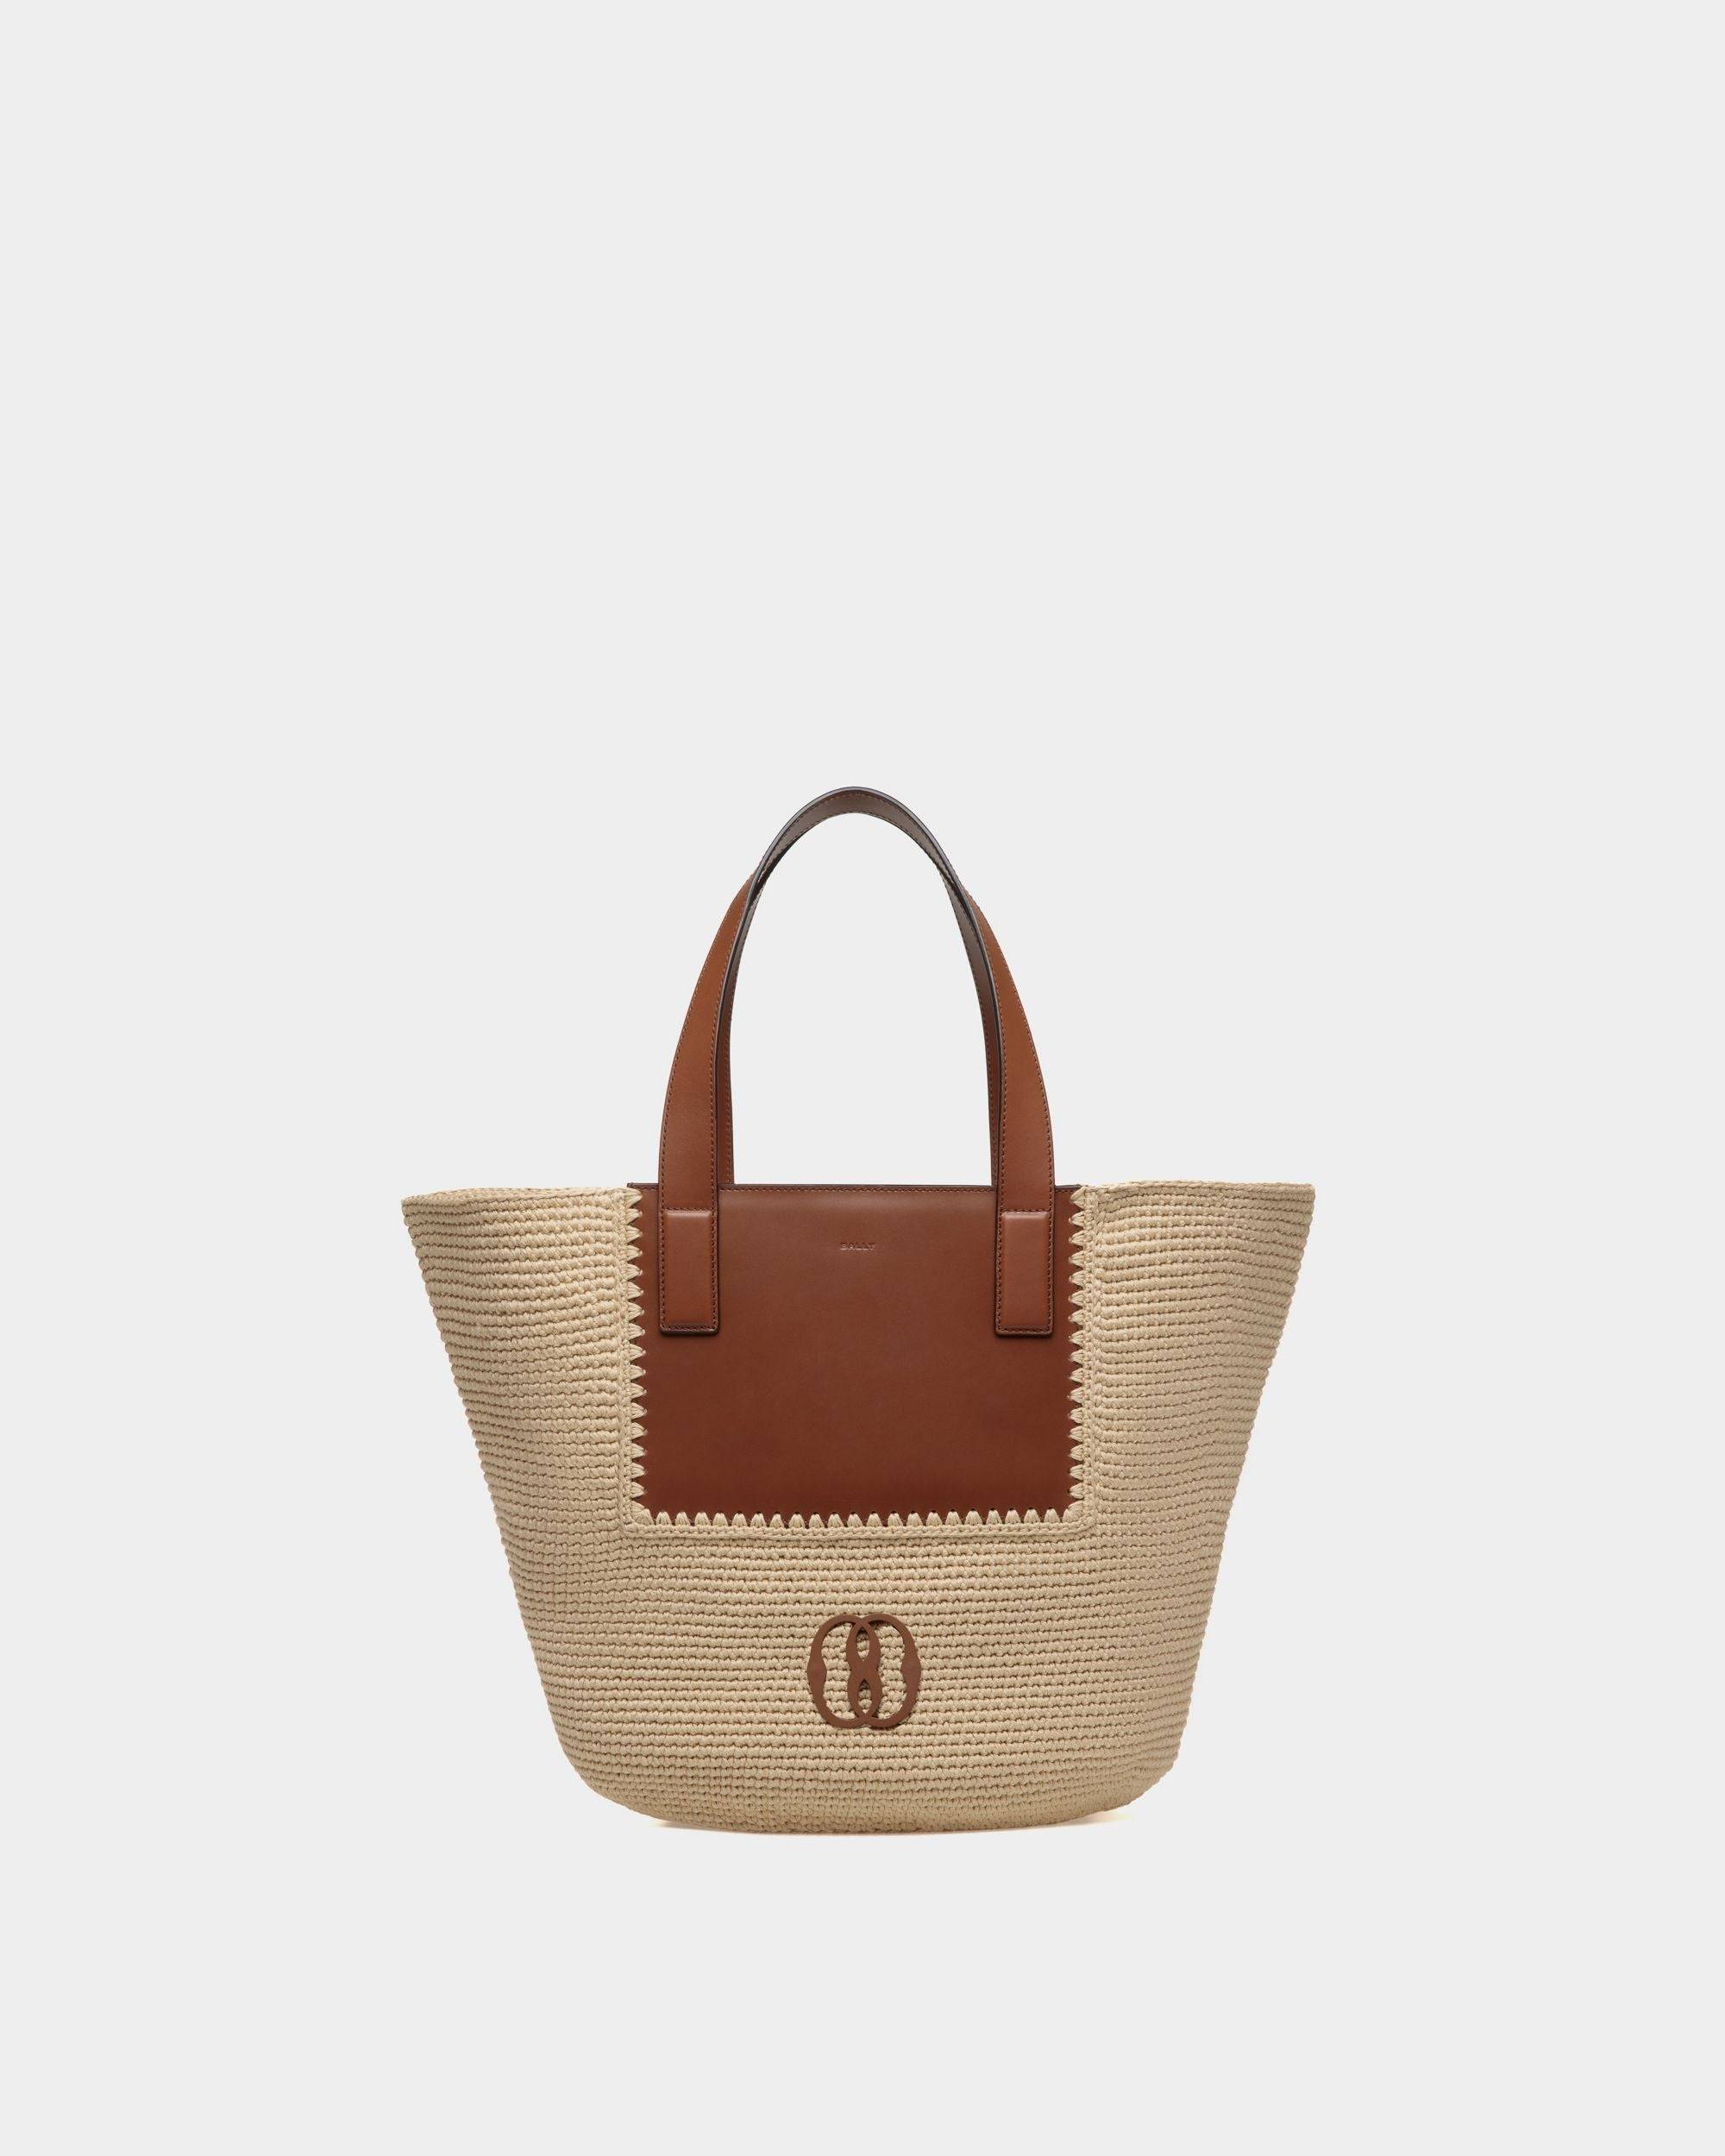 Lace | Women's Tote Bag in Neutral Cotton and Leather | Bally | Still Life Front